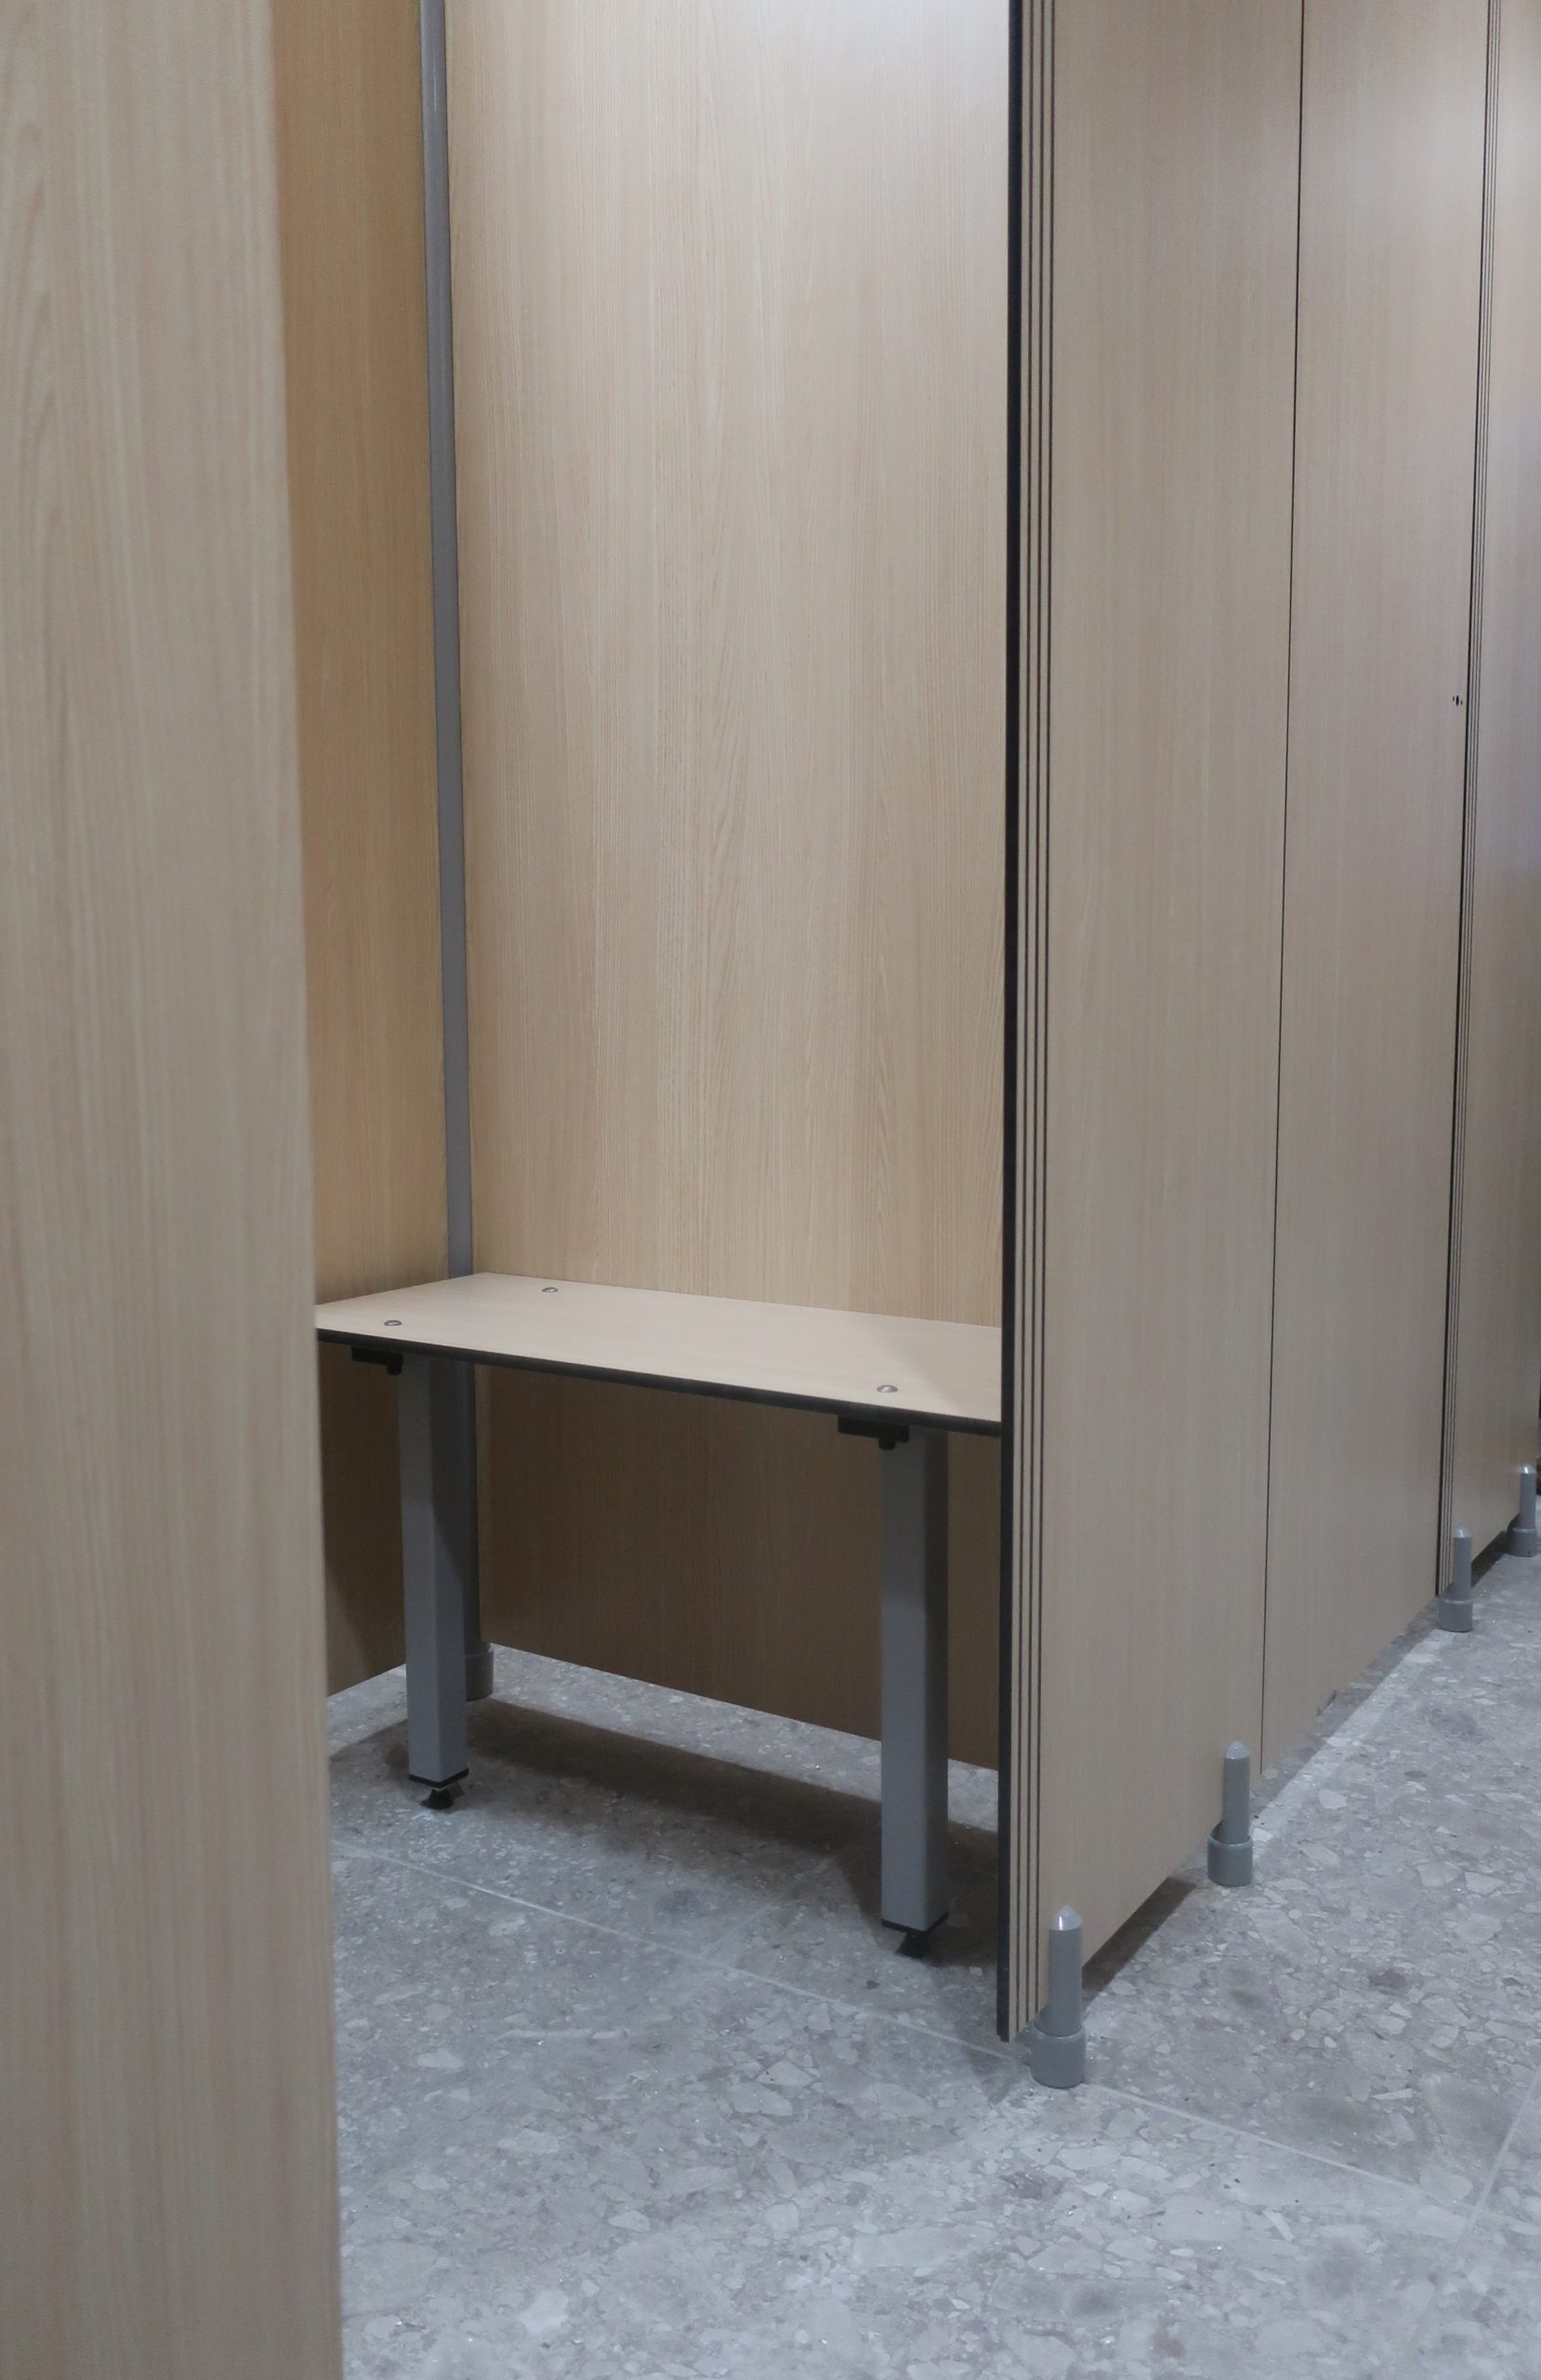 Cubicle bench with a privacy panel